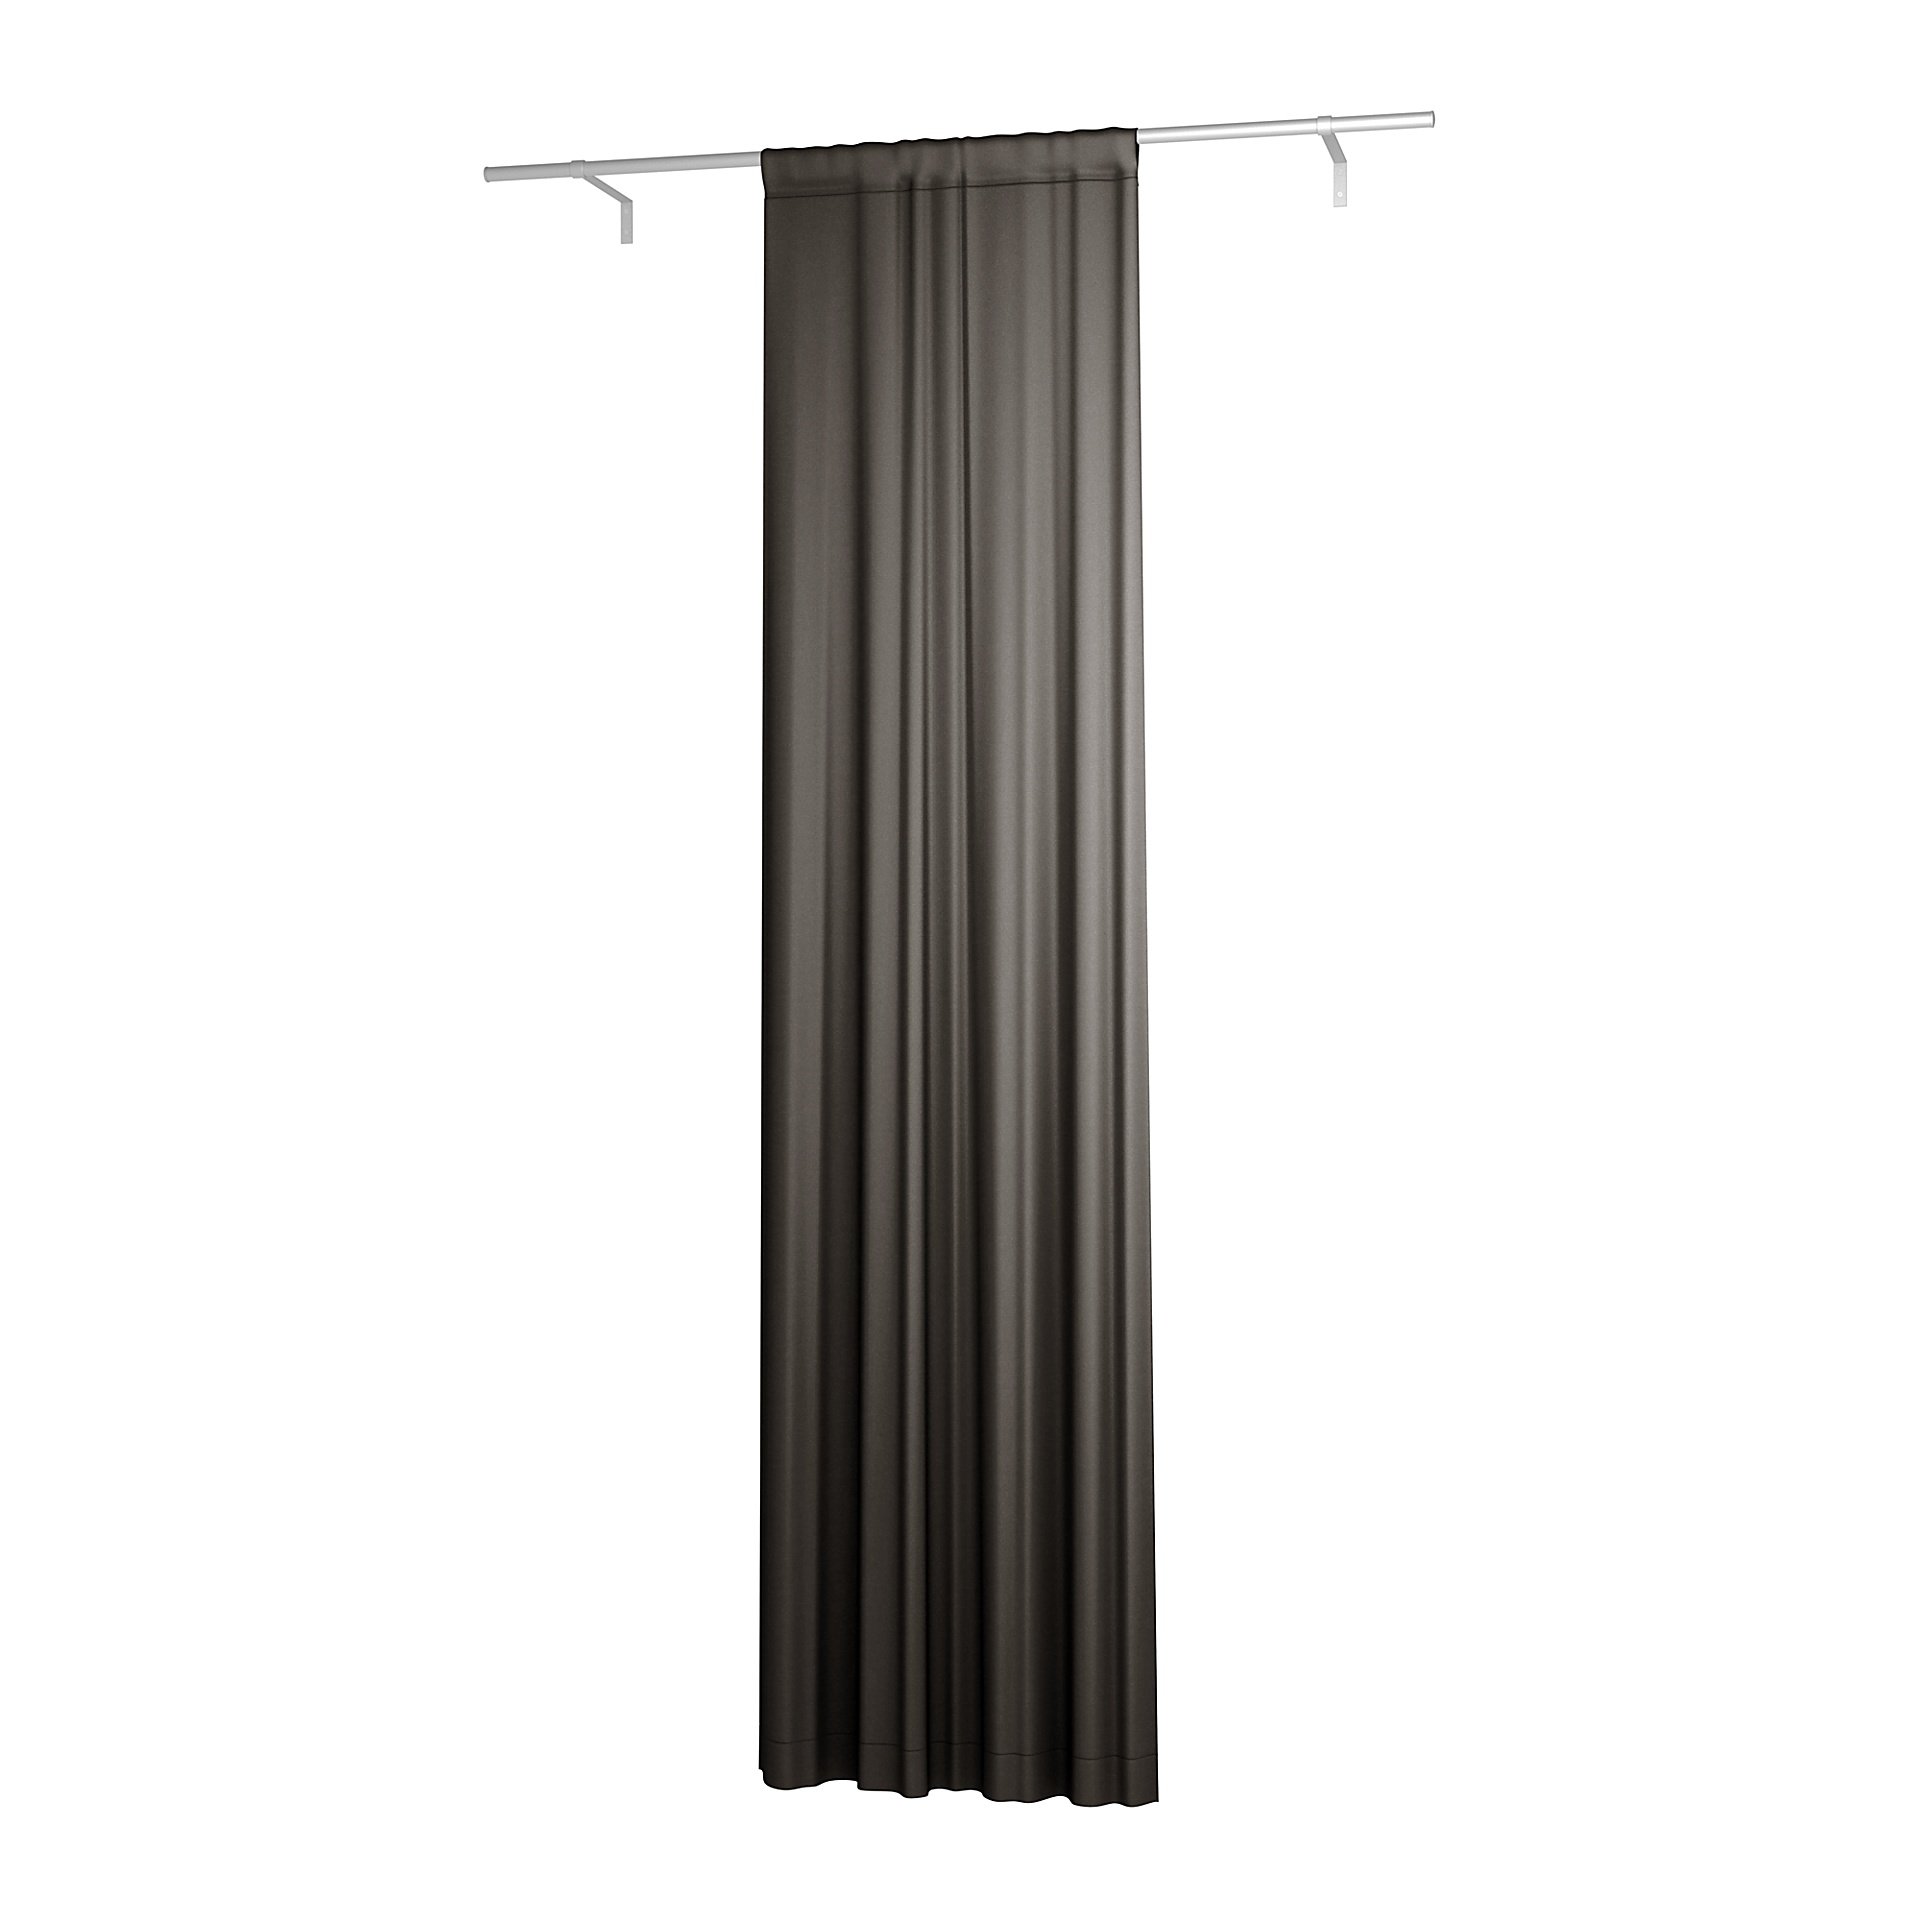 Single Width Curtain Panel with Tunnel/Creaseband, Lined, 250 cm, Licorice, Velvet - Bemz